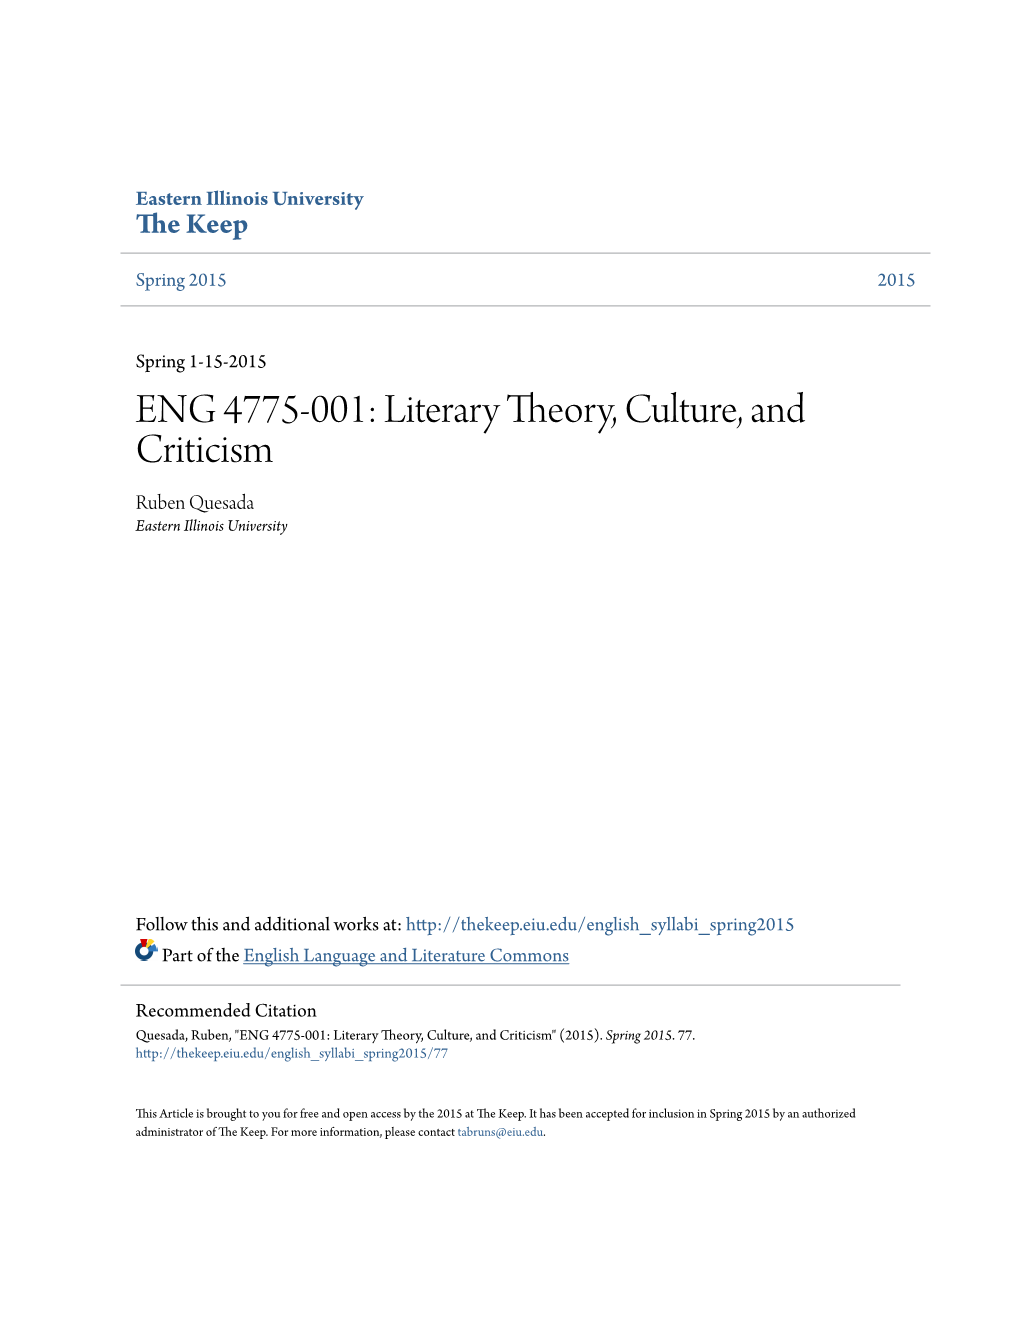 ENG 4775-001: Literary Theory, Culture, and Criticism Ruben Quesada Eastern Illinois University